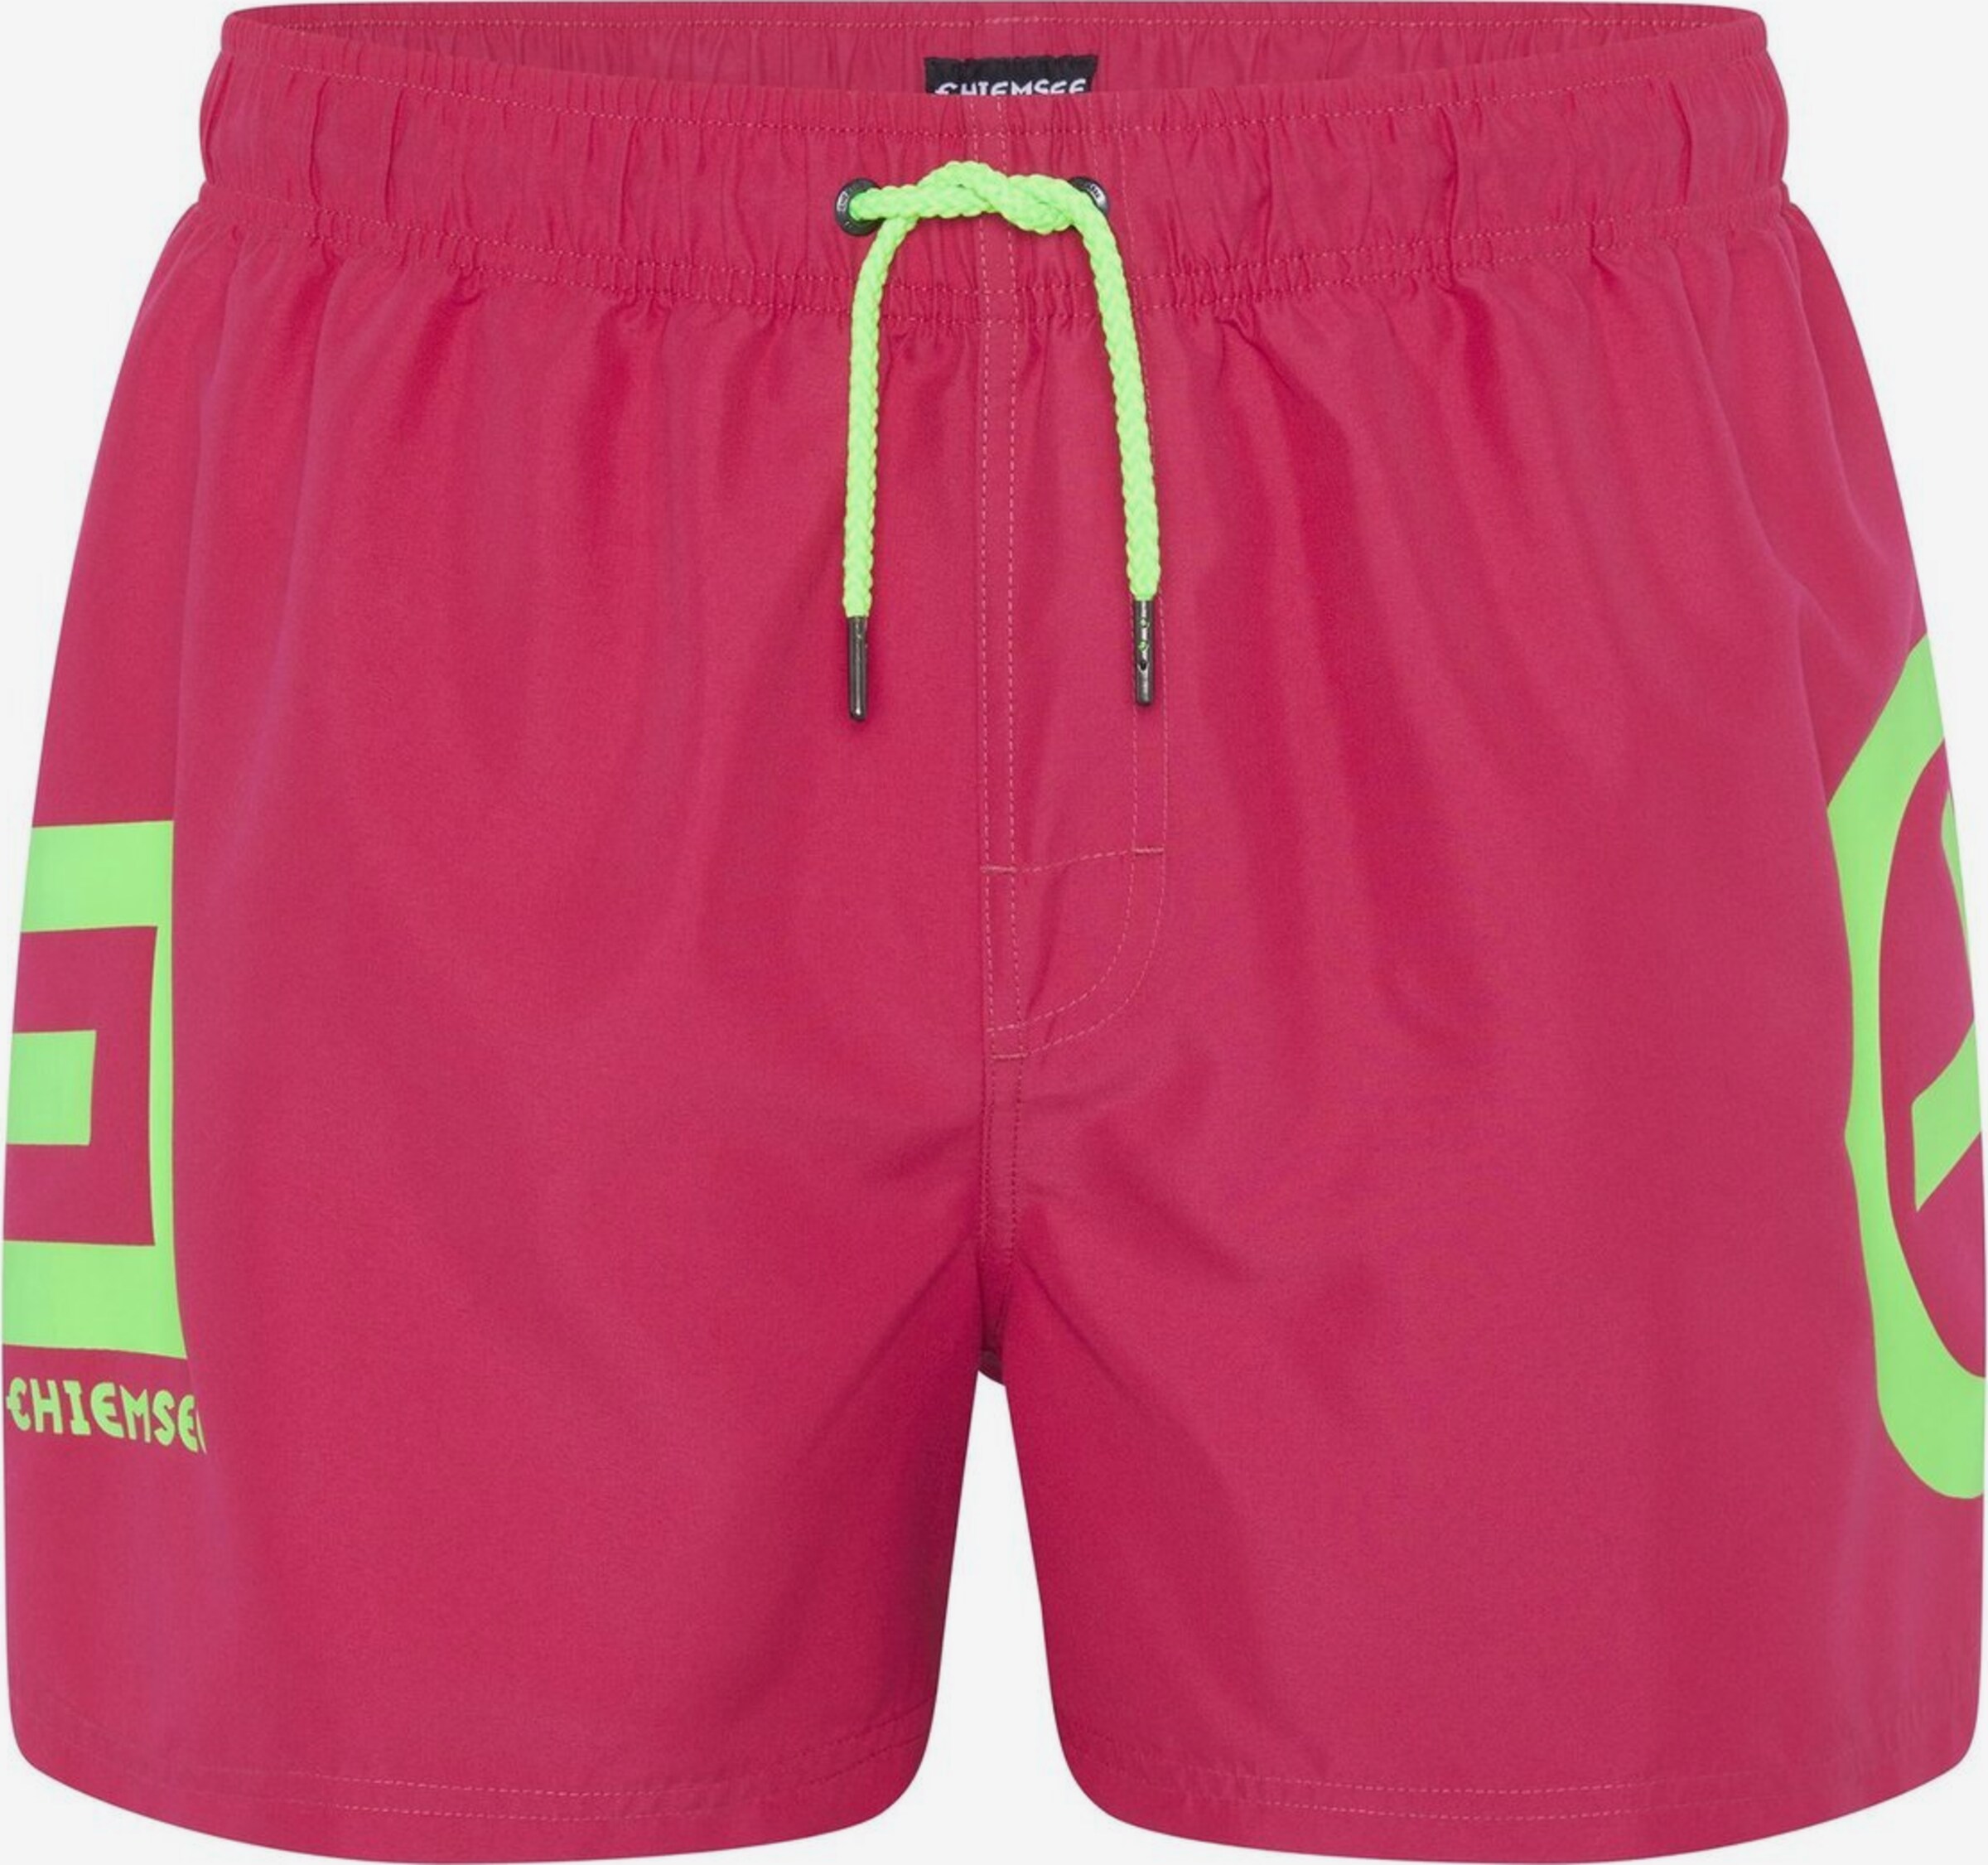 CHIEMSEE Badeshorts in Pink | ABOUT YOU